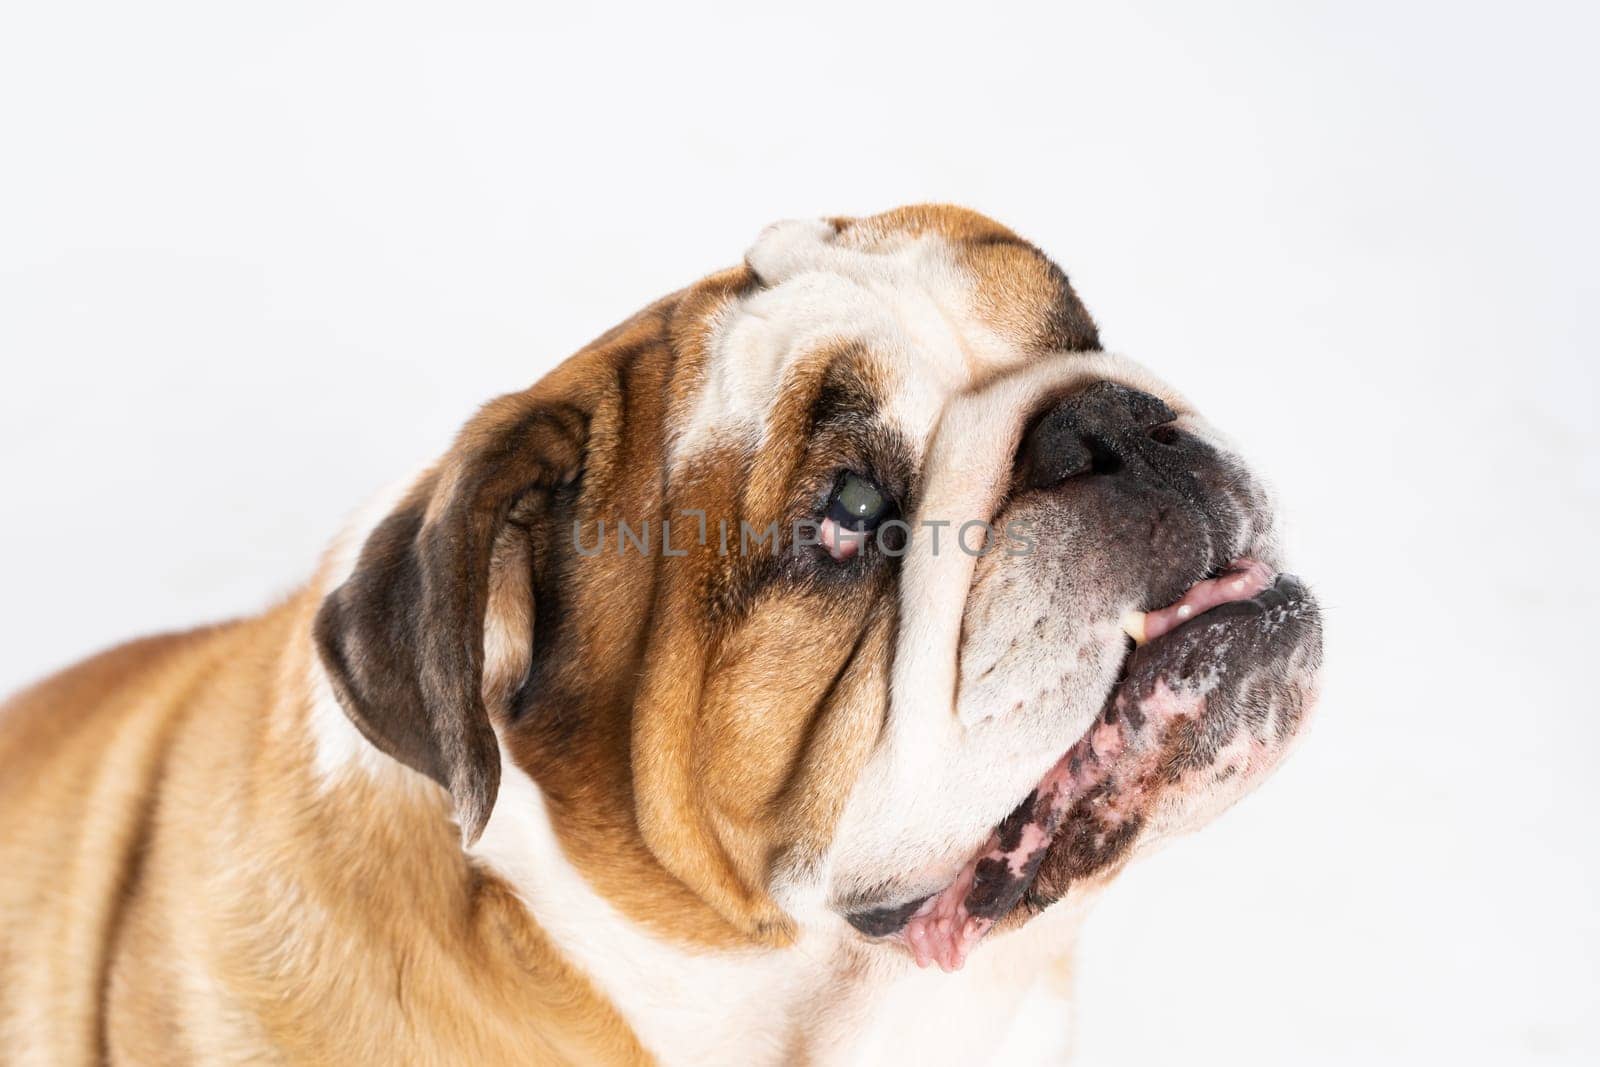 Closed mouth. The English Bulldog was bred as a companion and deterrent dog. A breed with a brown coat with white patches.